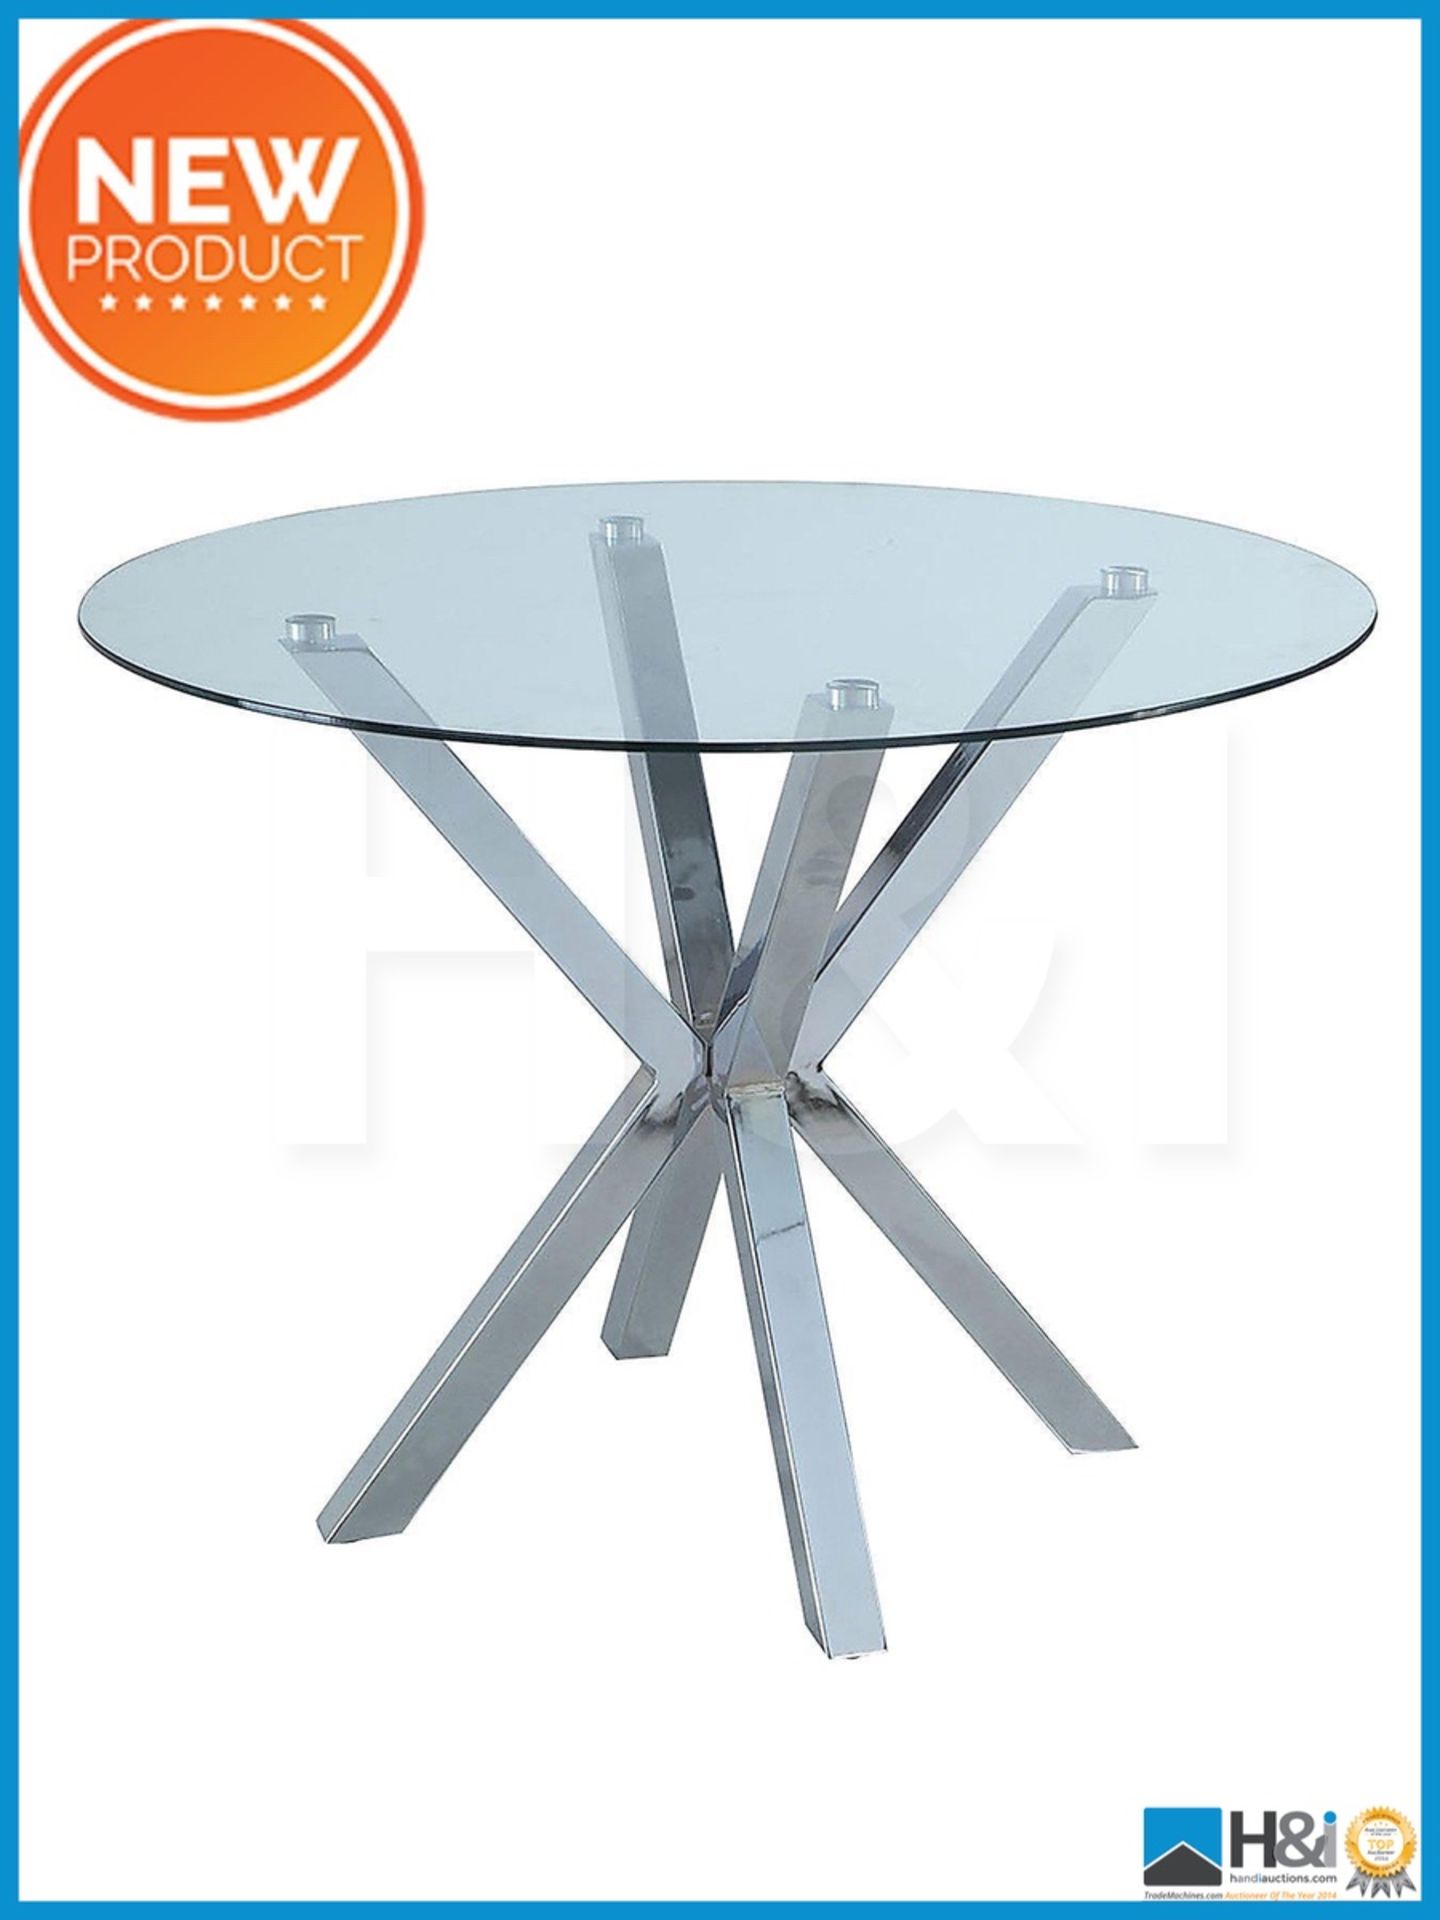 NEW IN BOX CHOPSTICK DINING TABLE [CLEAR/CHROME] 75 x 100 x 100cm RRP £246 Appraisal: Viewing